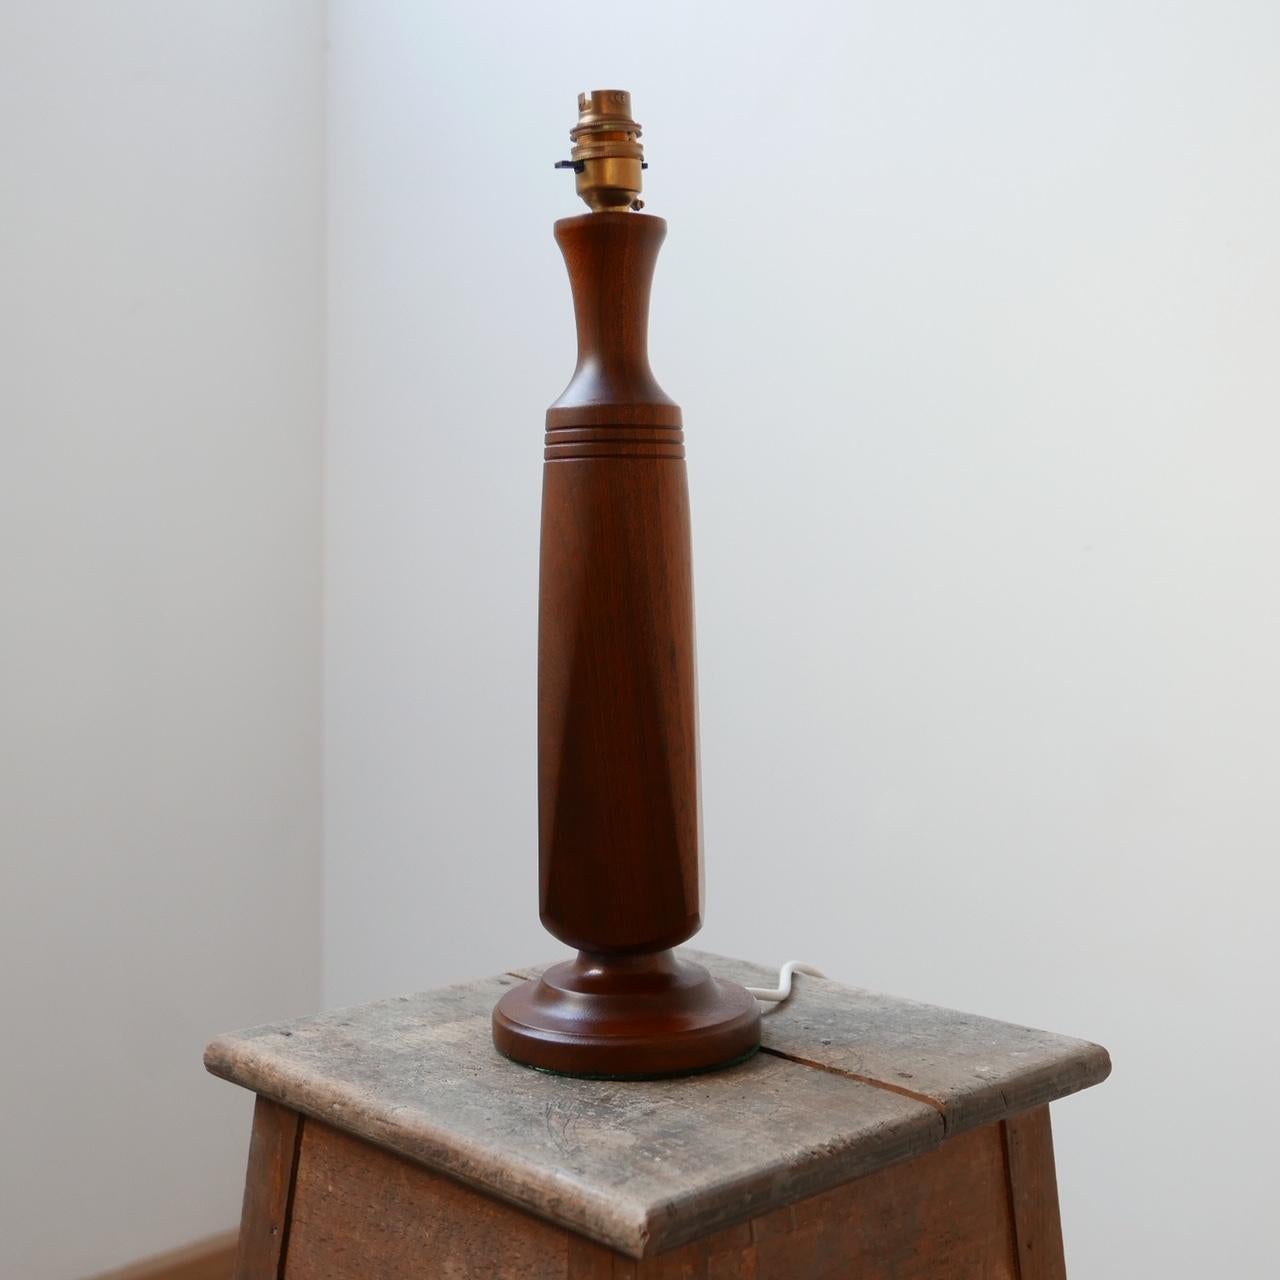 An elegant midcentury teak table lamp.

Likely Danish, circa 1960s.

Simple elegant turned wood.

Re-wired and PAT tested.

Dimensions: 46 height x 12 diameter in cm.